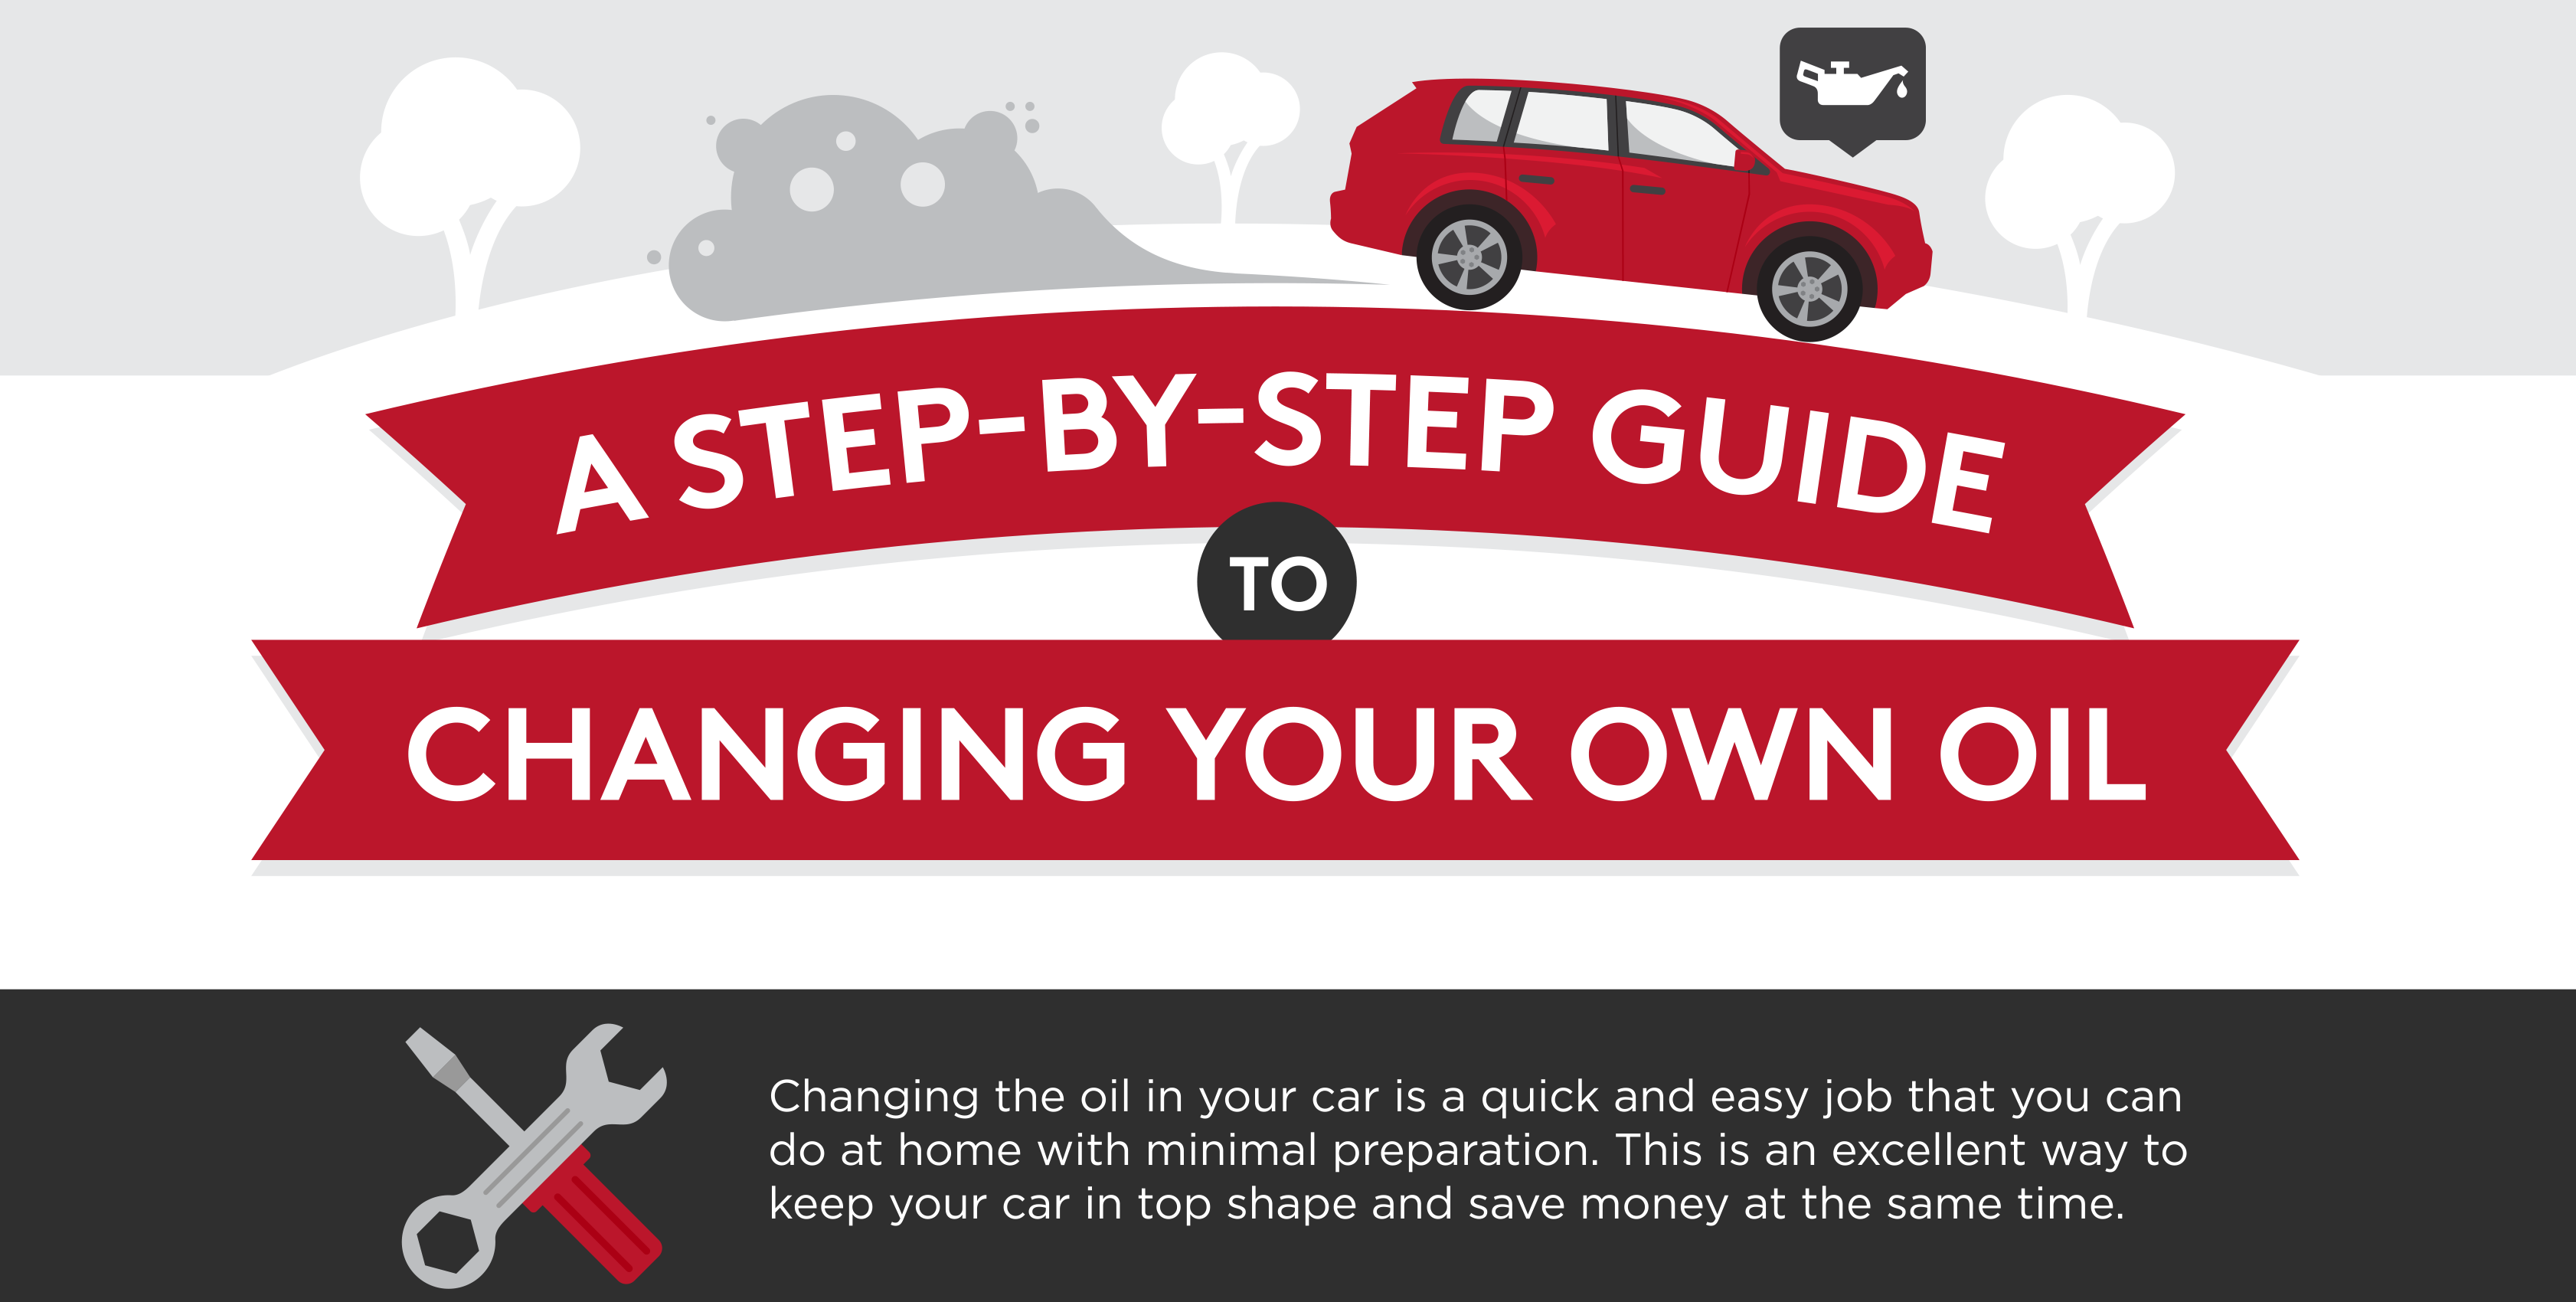 A Step-By-Step Guide to Changing Your Own Oil